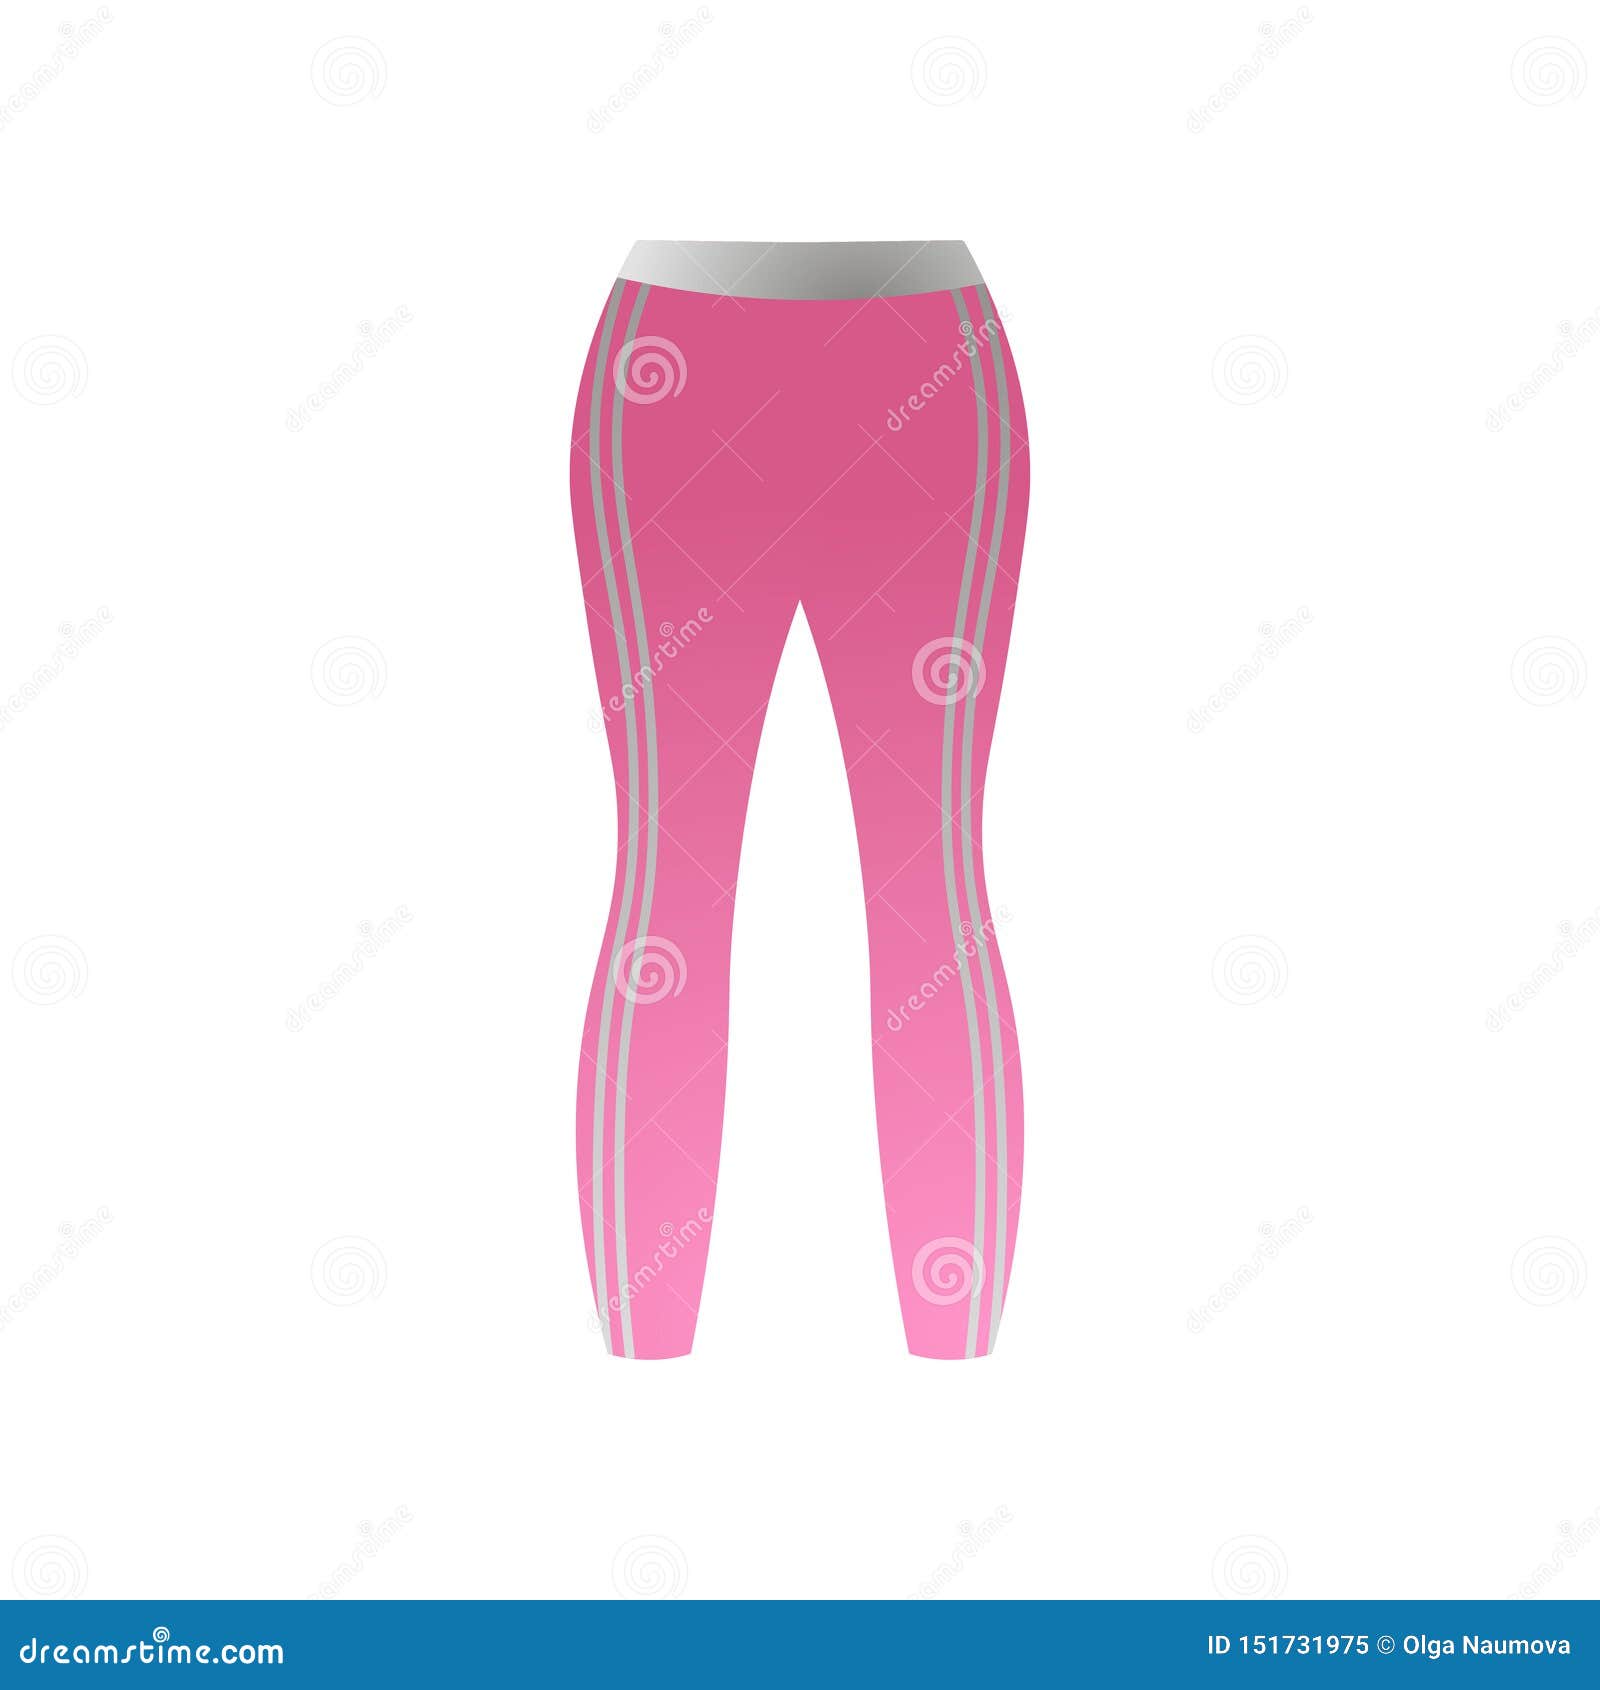 fabletics high waisted woman legging for sport activity